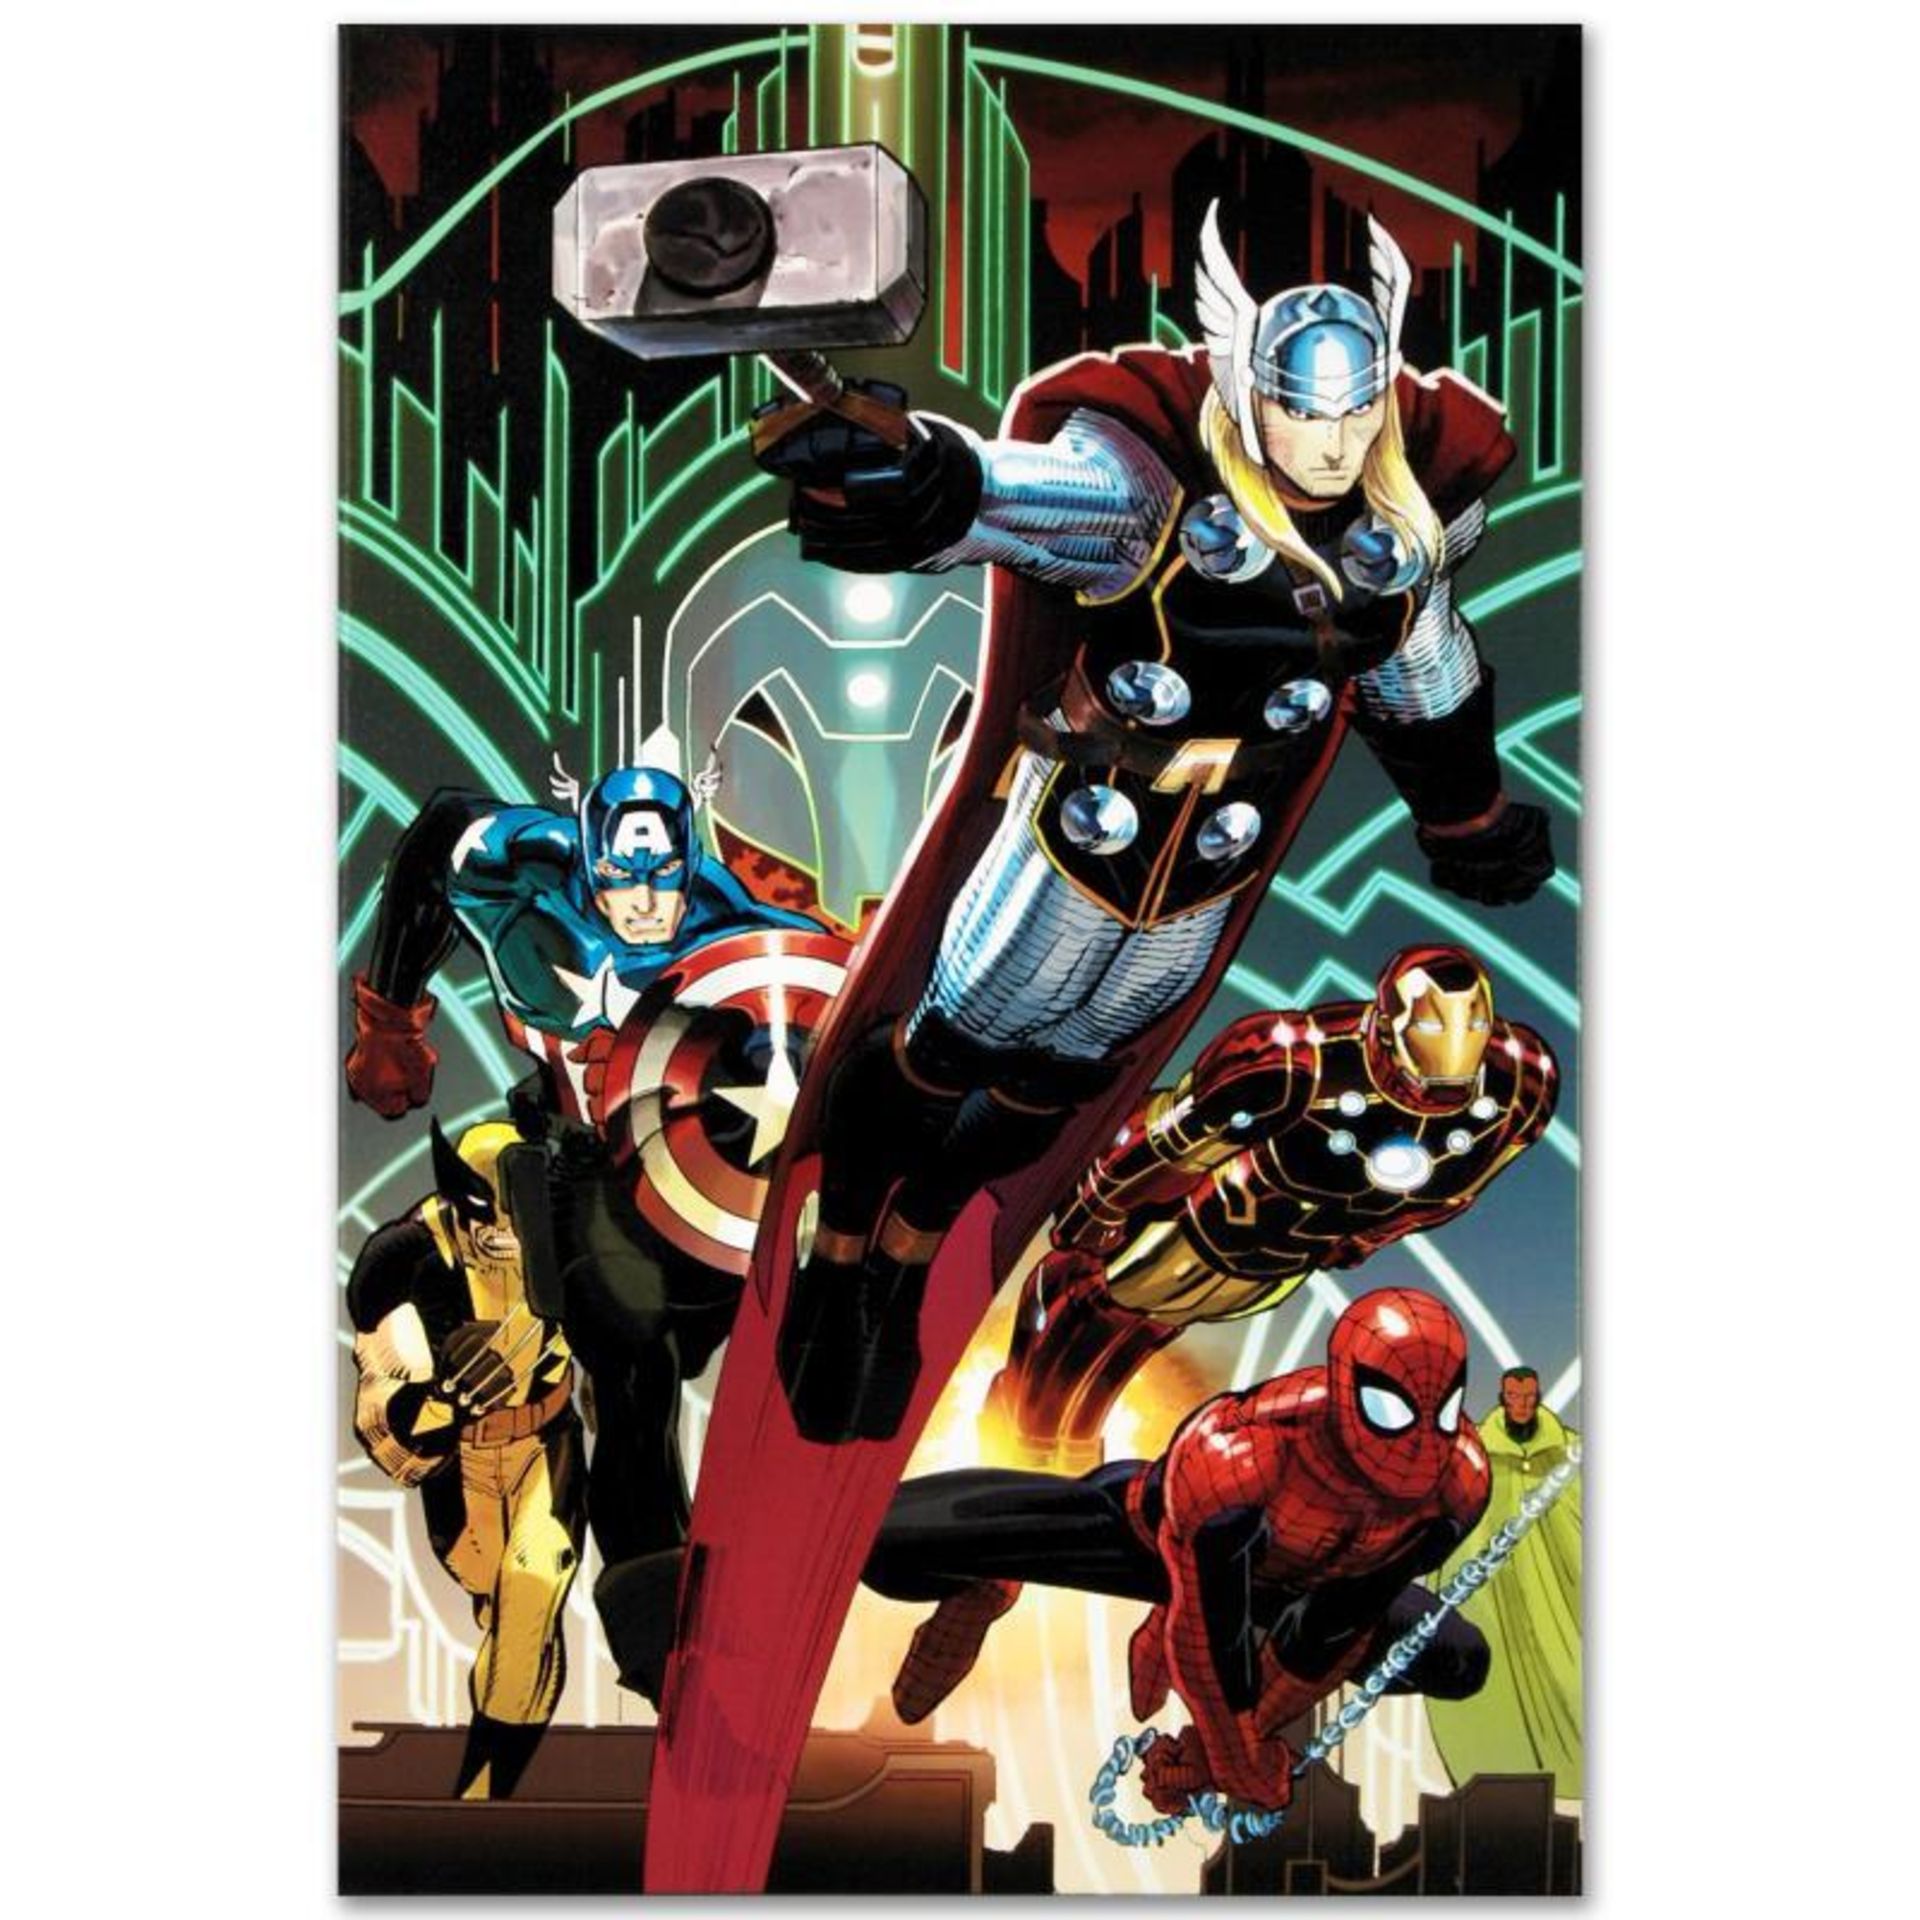 Marvel Comics "Avengers #5" Numbered Limited Edition Giclee on Canvas by John Ro